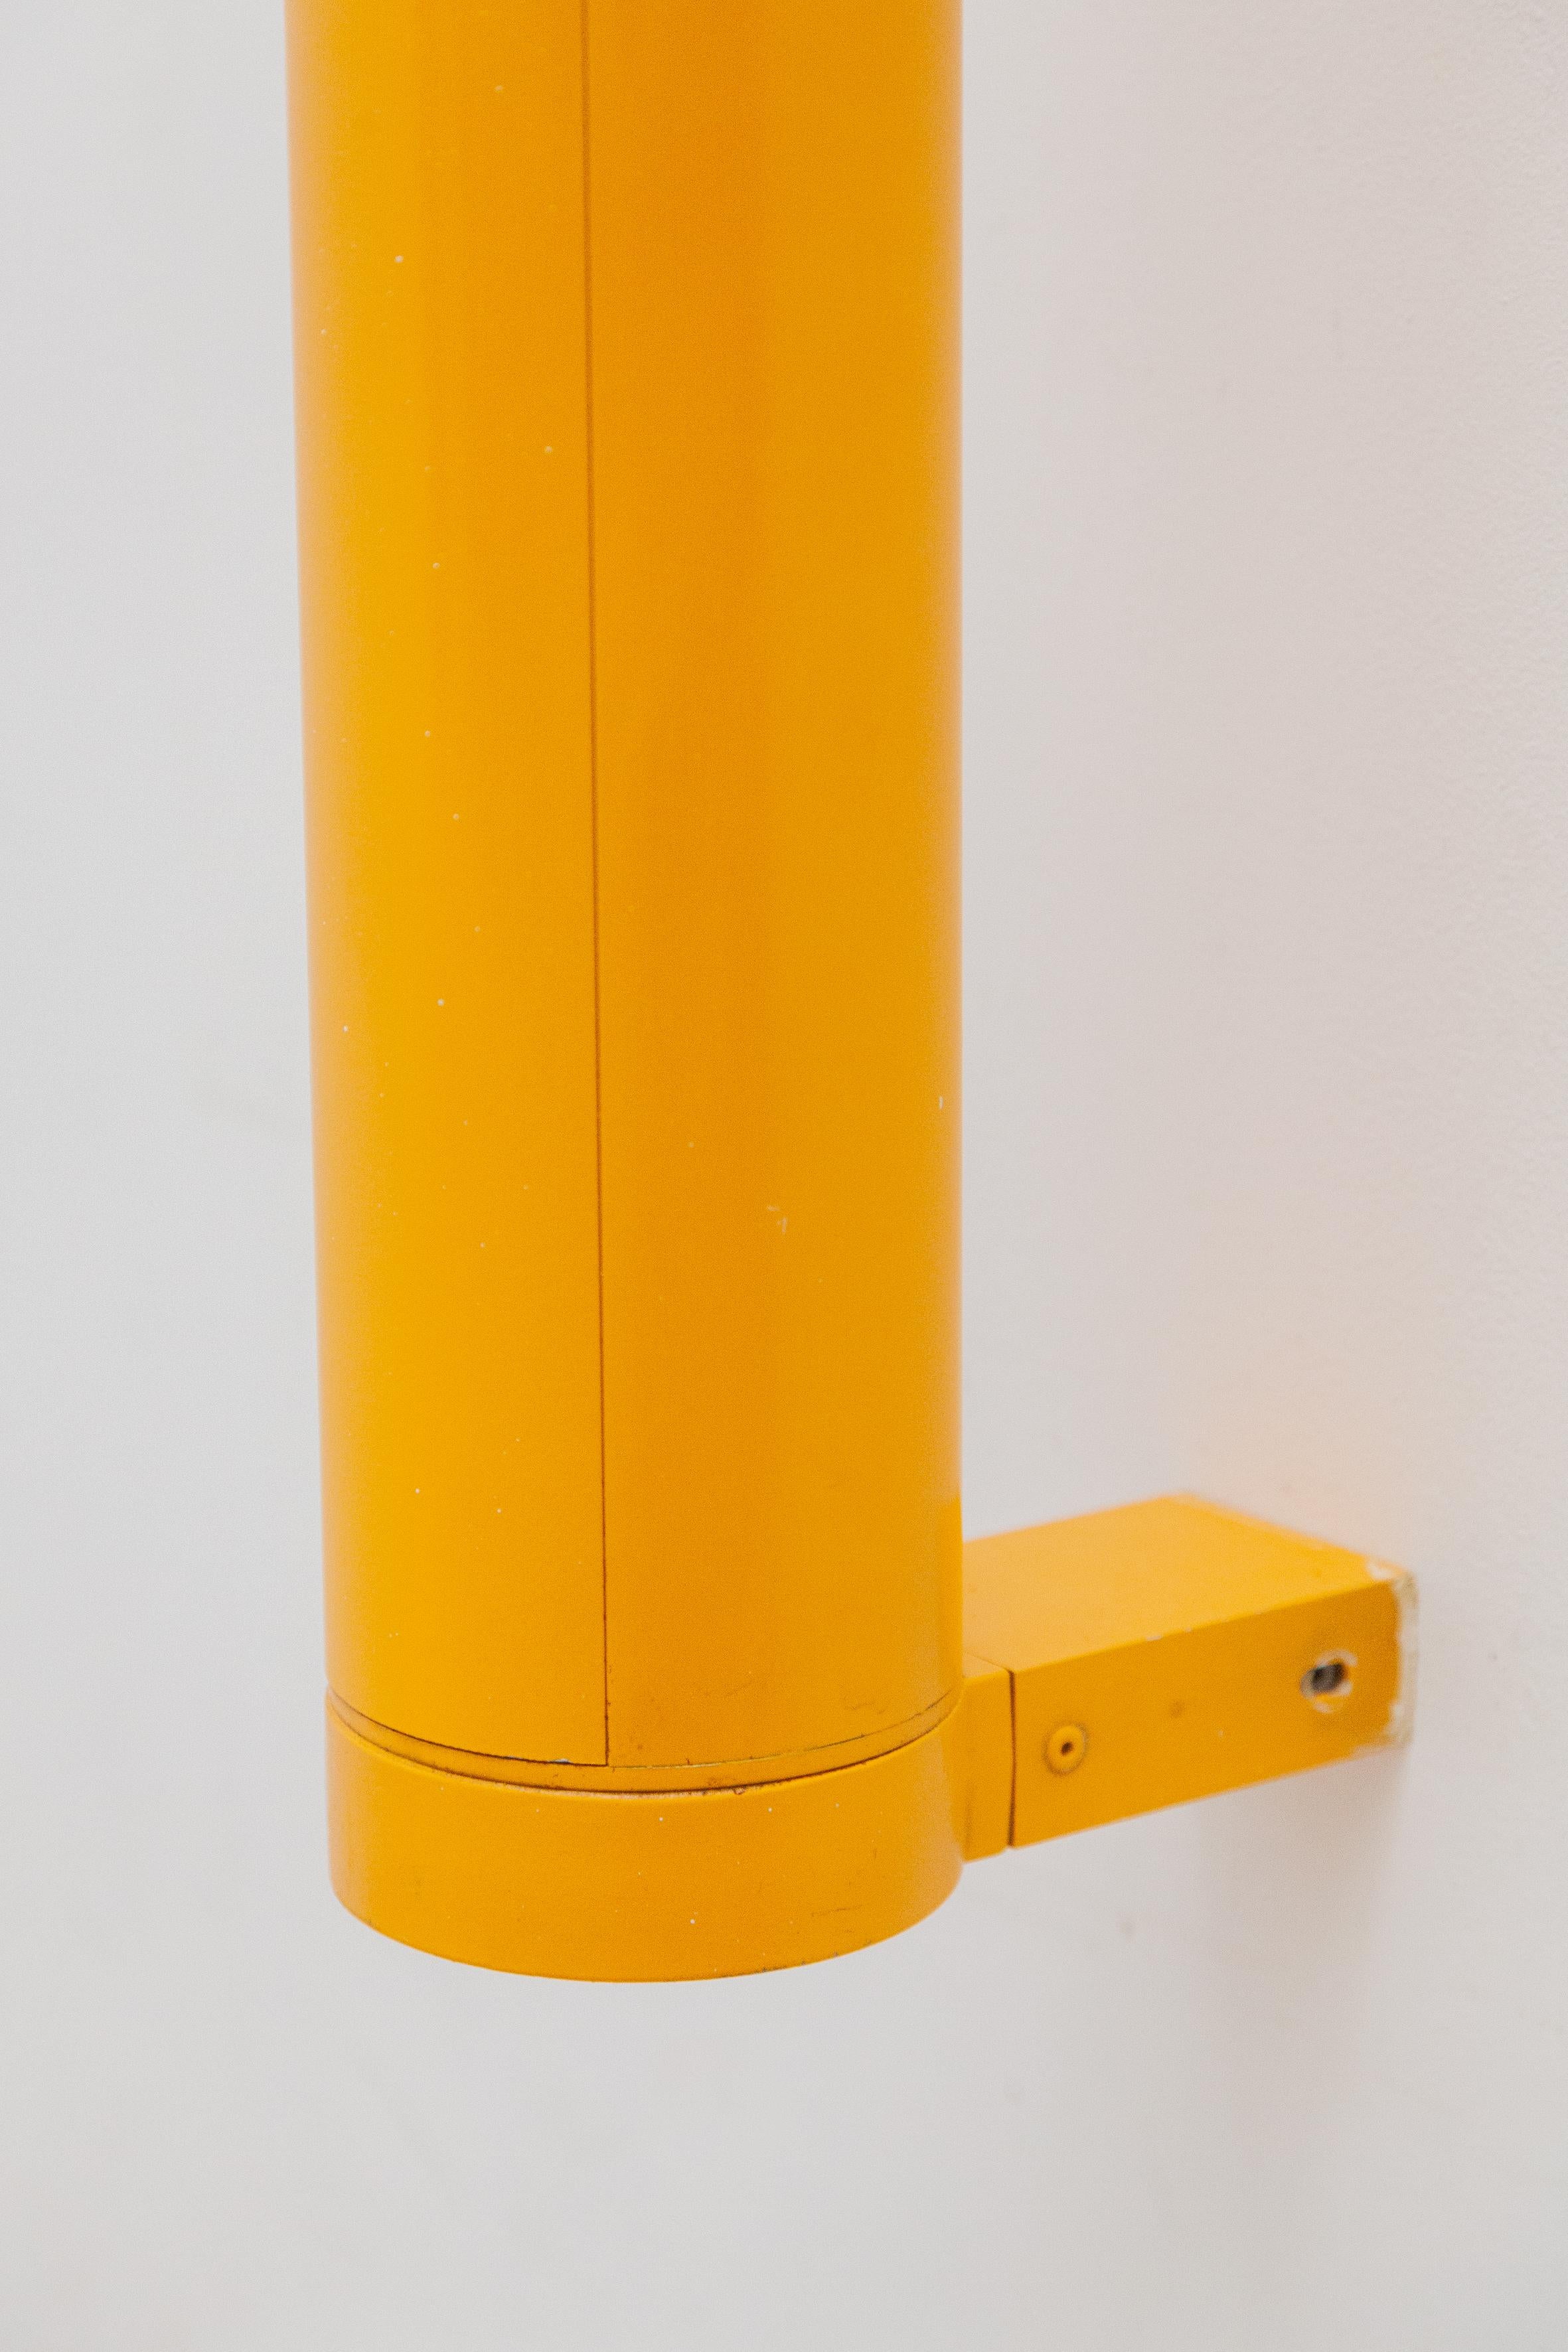 Yellow Metal and Fluorescent Tube Wall Lamp, 1970s, Germany For Sale 2